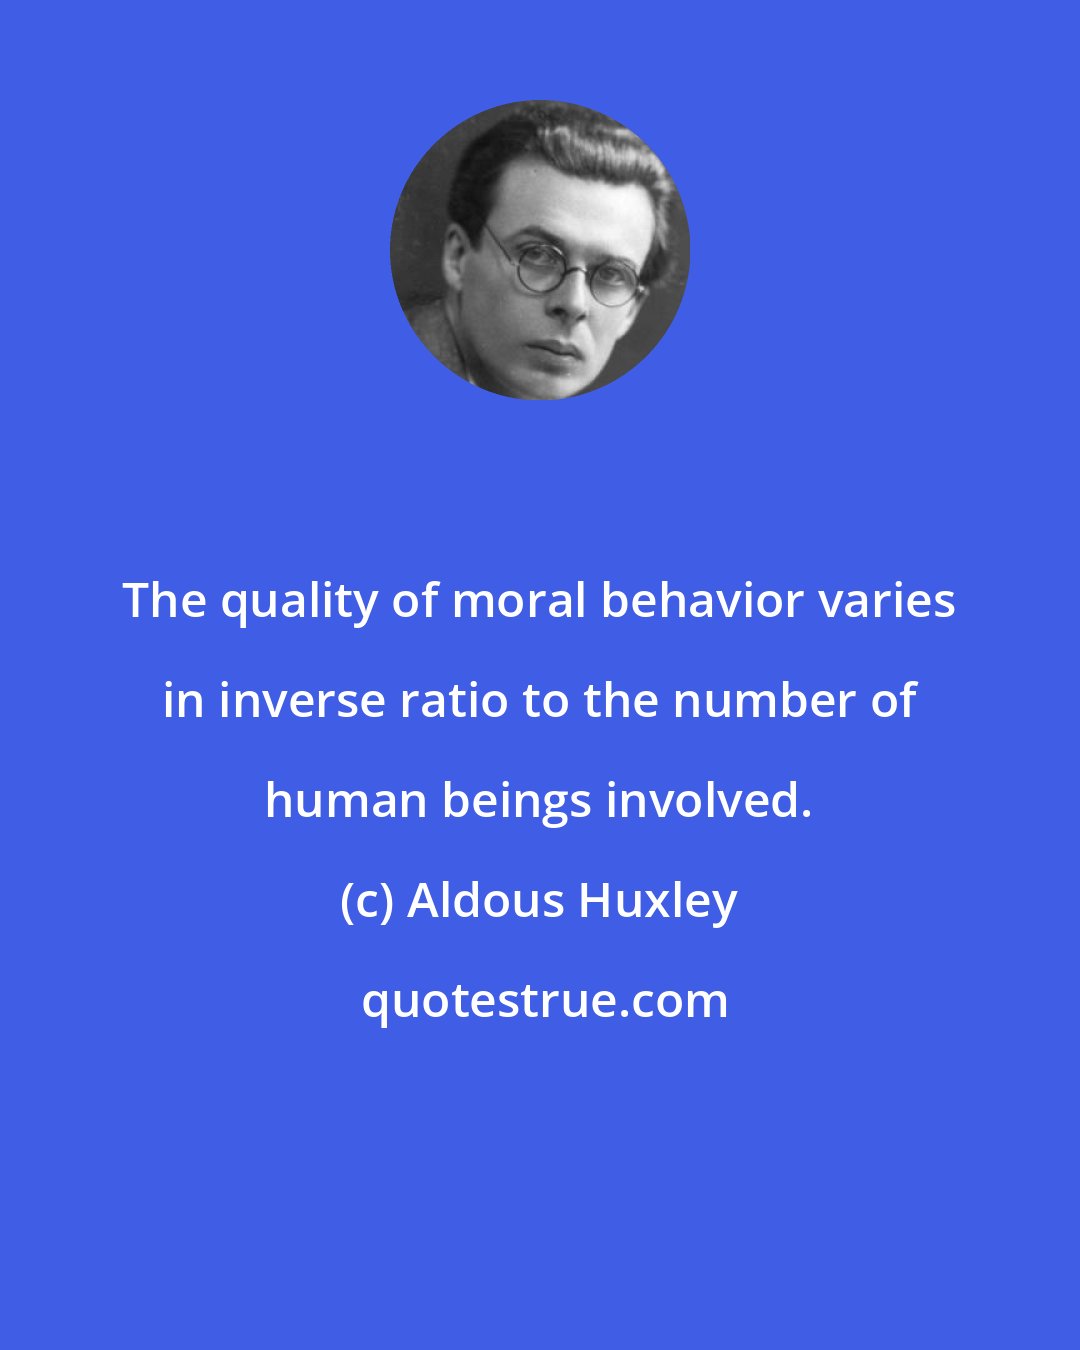 Aldous Huxley: The quality of moral behavior varies in inverse ratio to the number of human beings involved.